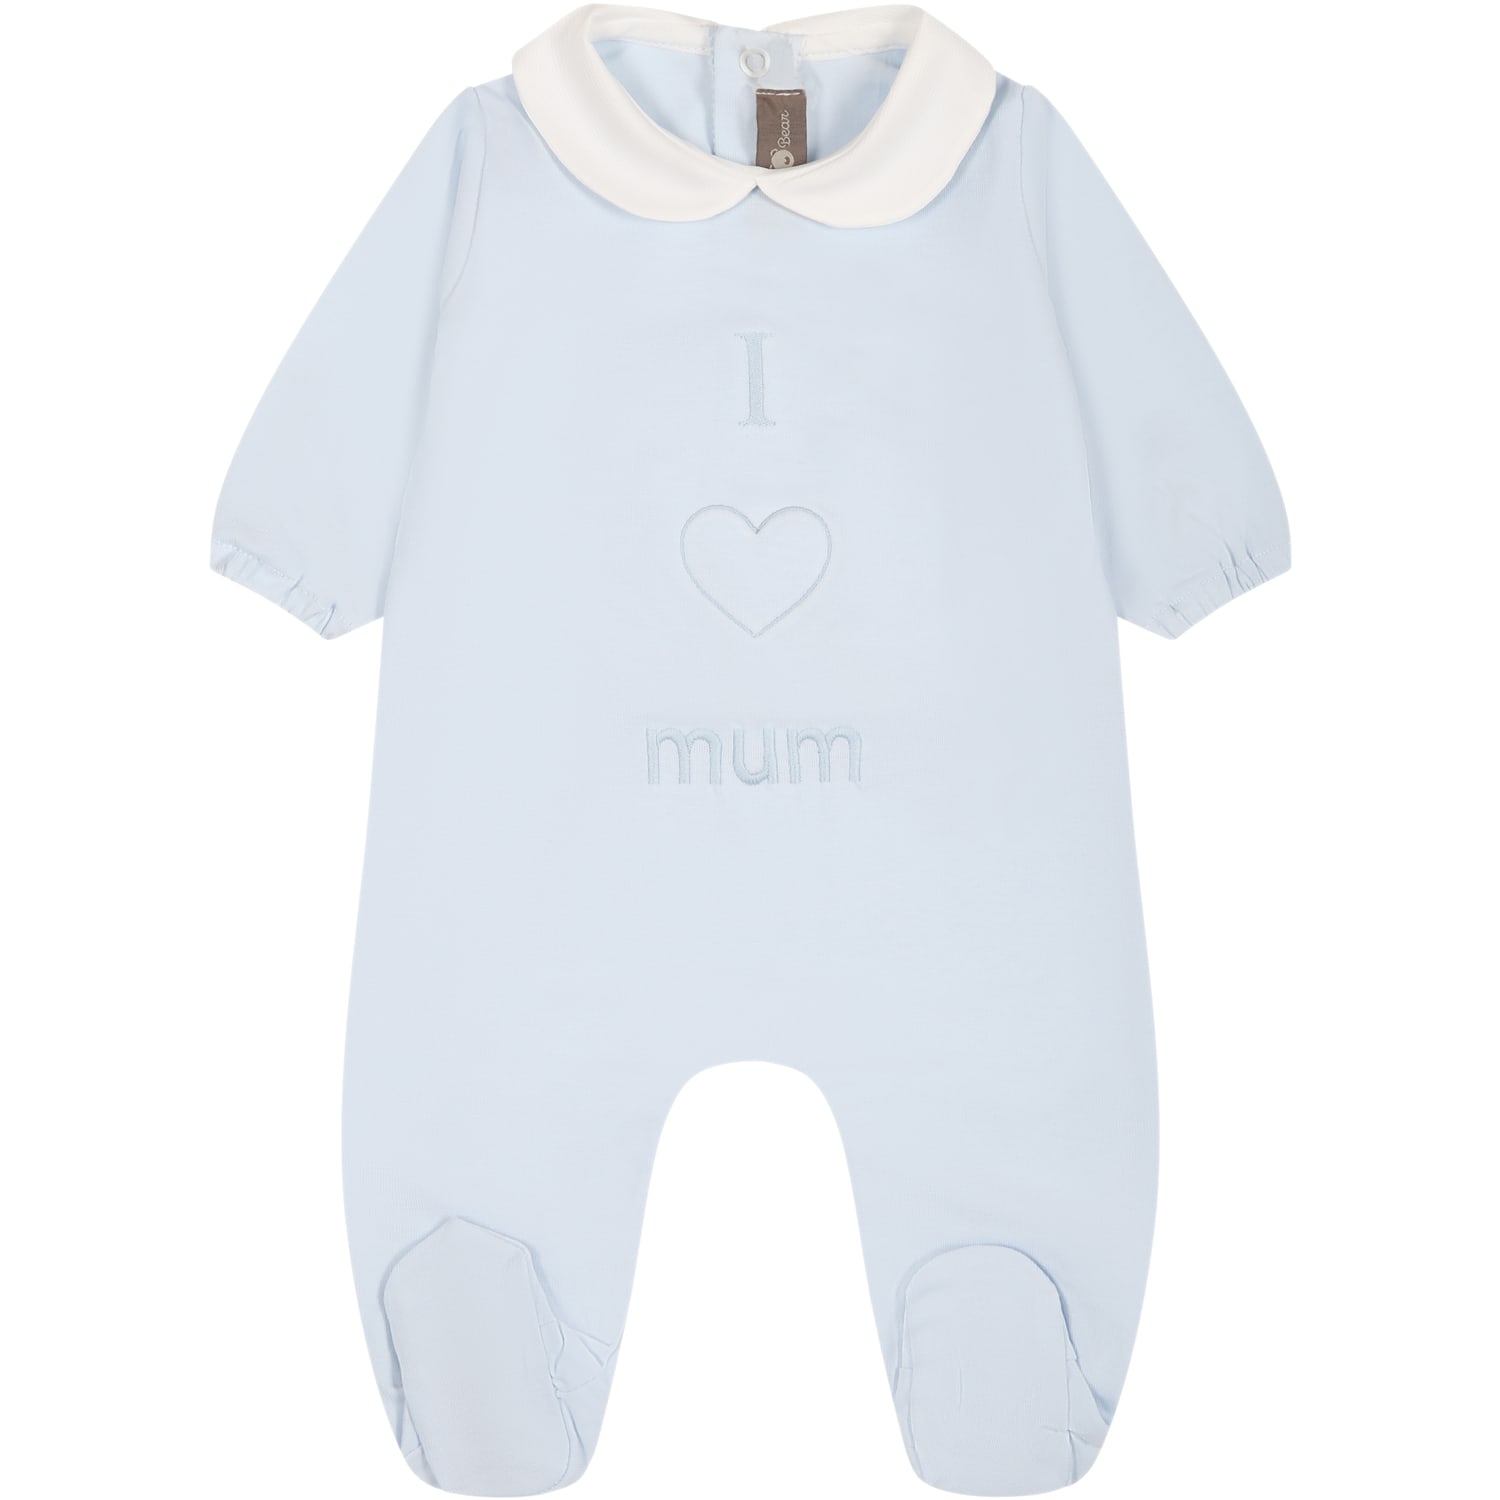 LITTLE BEAR LIGHT BLUE ONESIE FOR BABY BOY WITH WRITING AND HEART